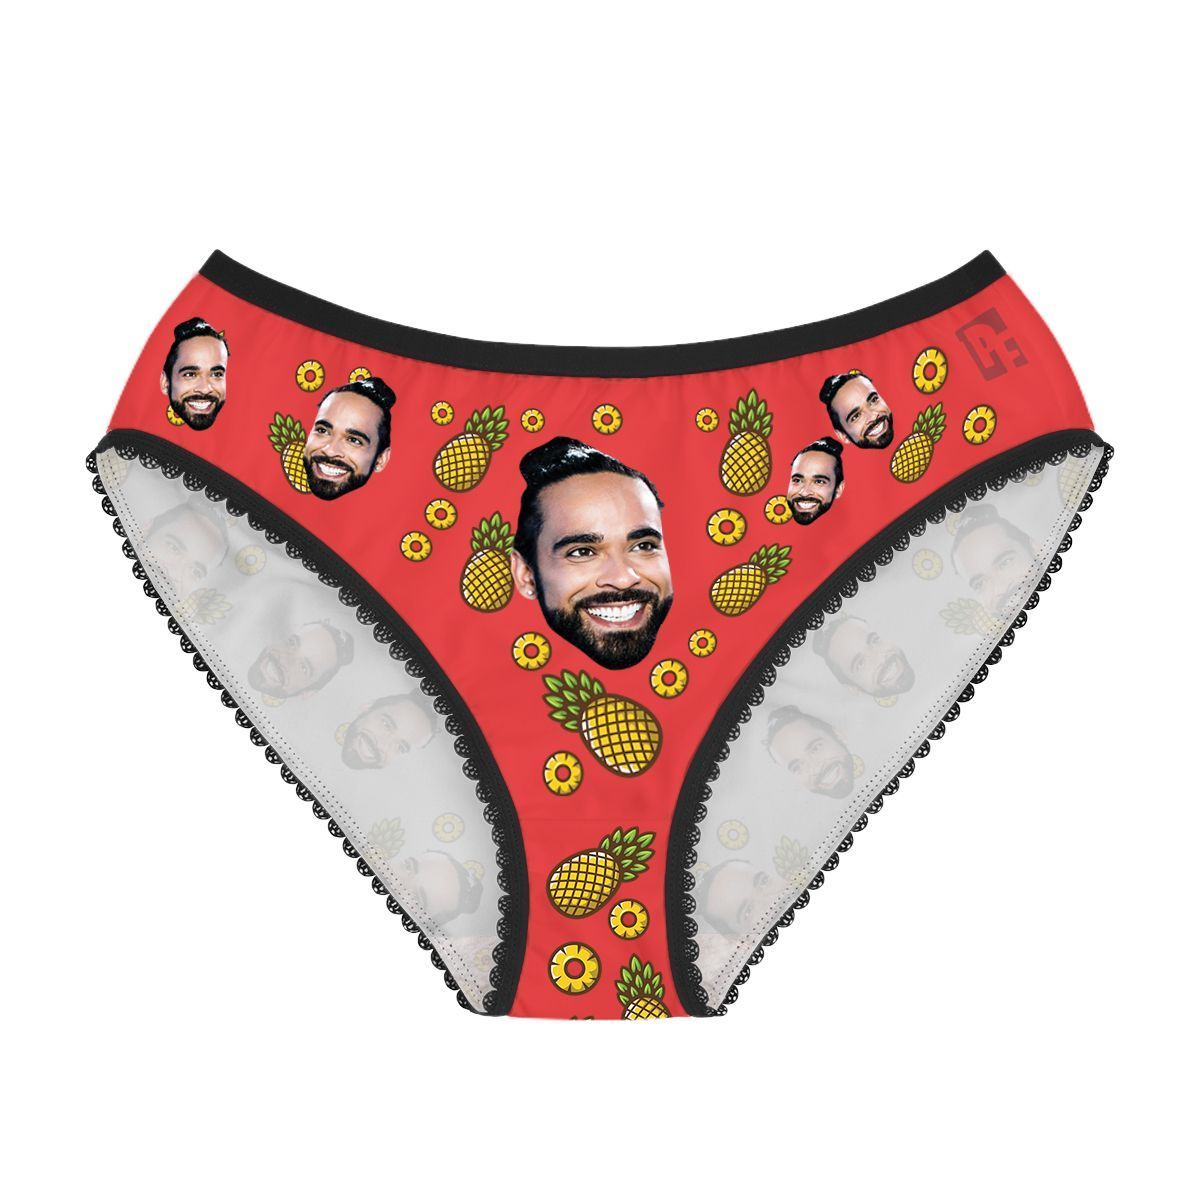 Red Fruits women's underwear briefs personalized with photo printed on them